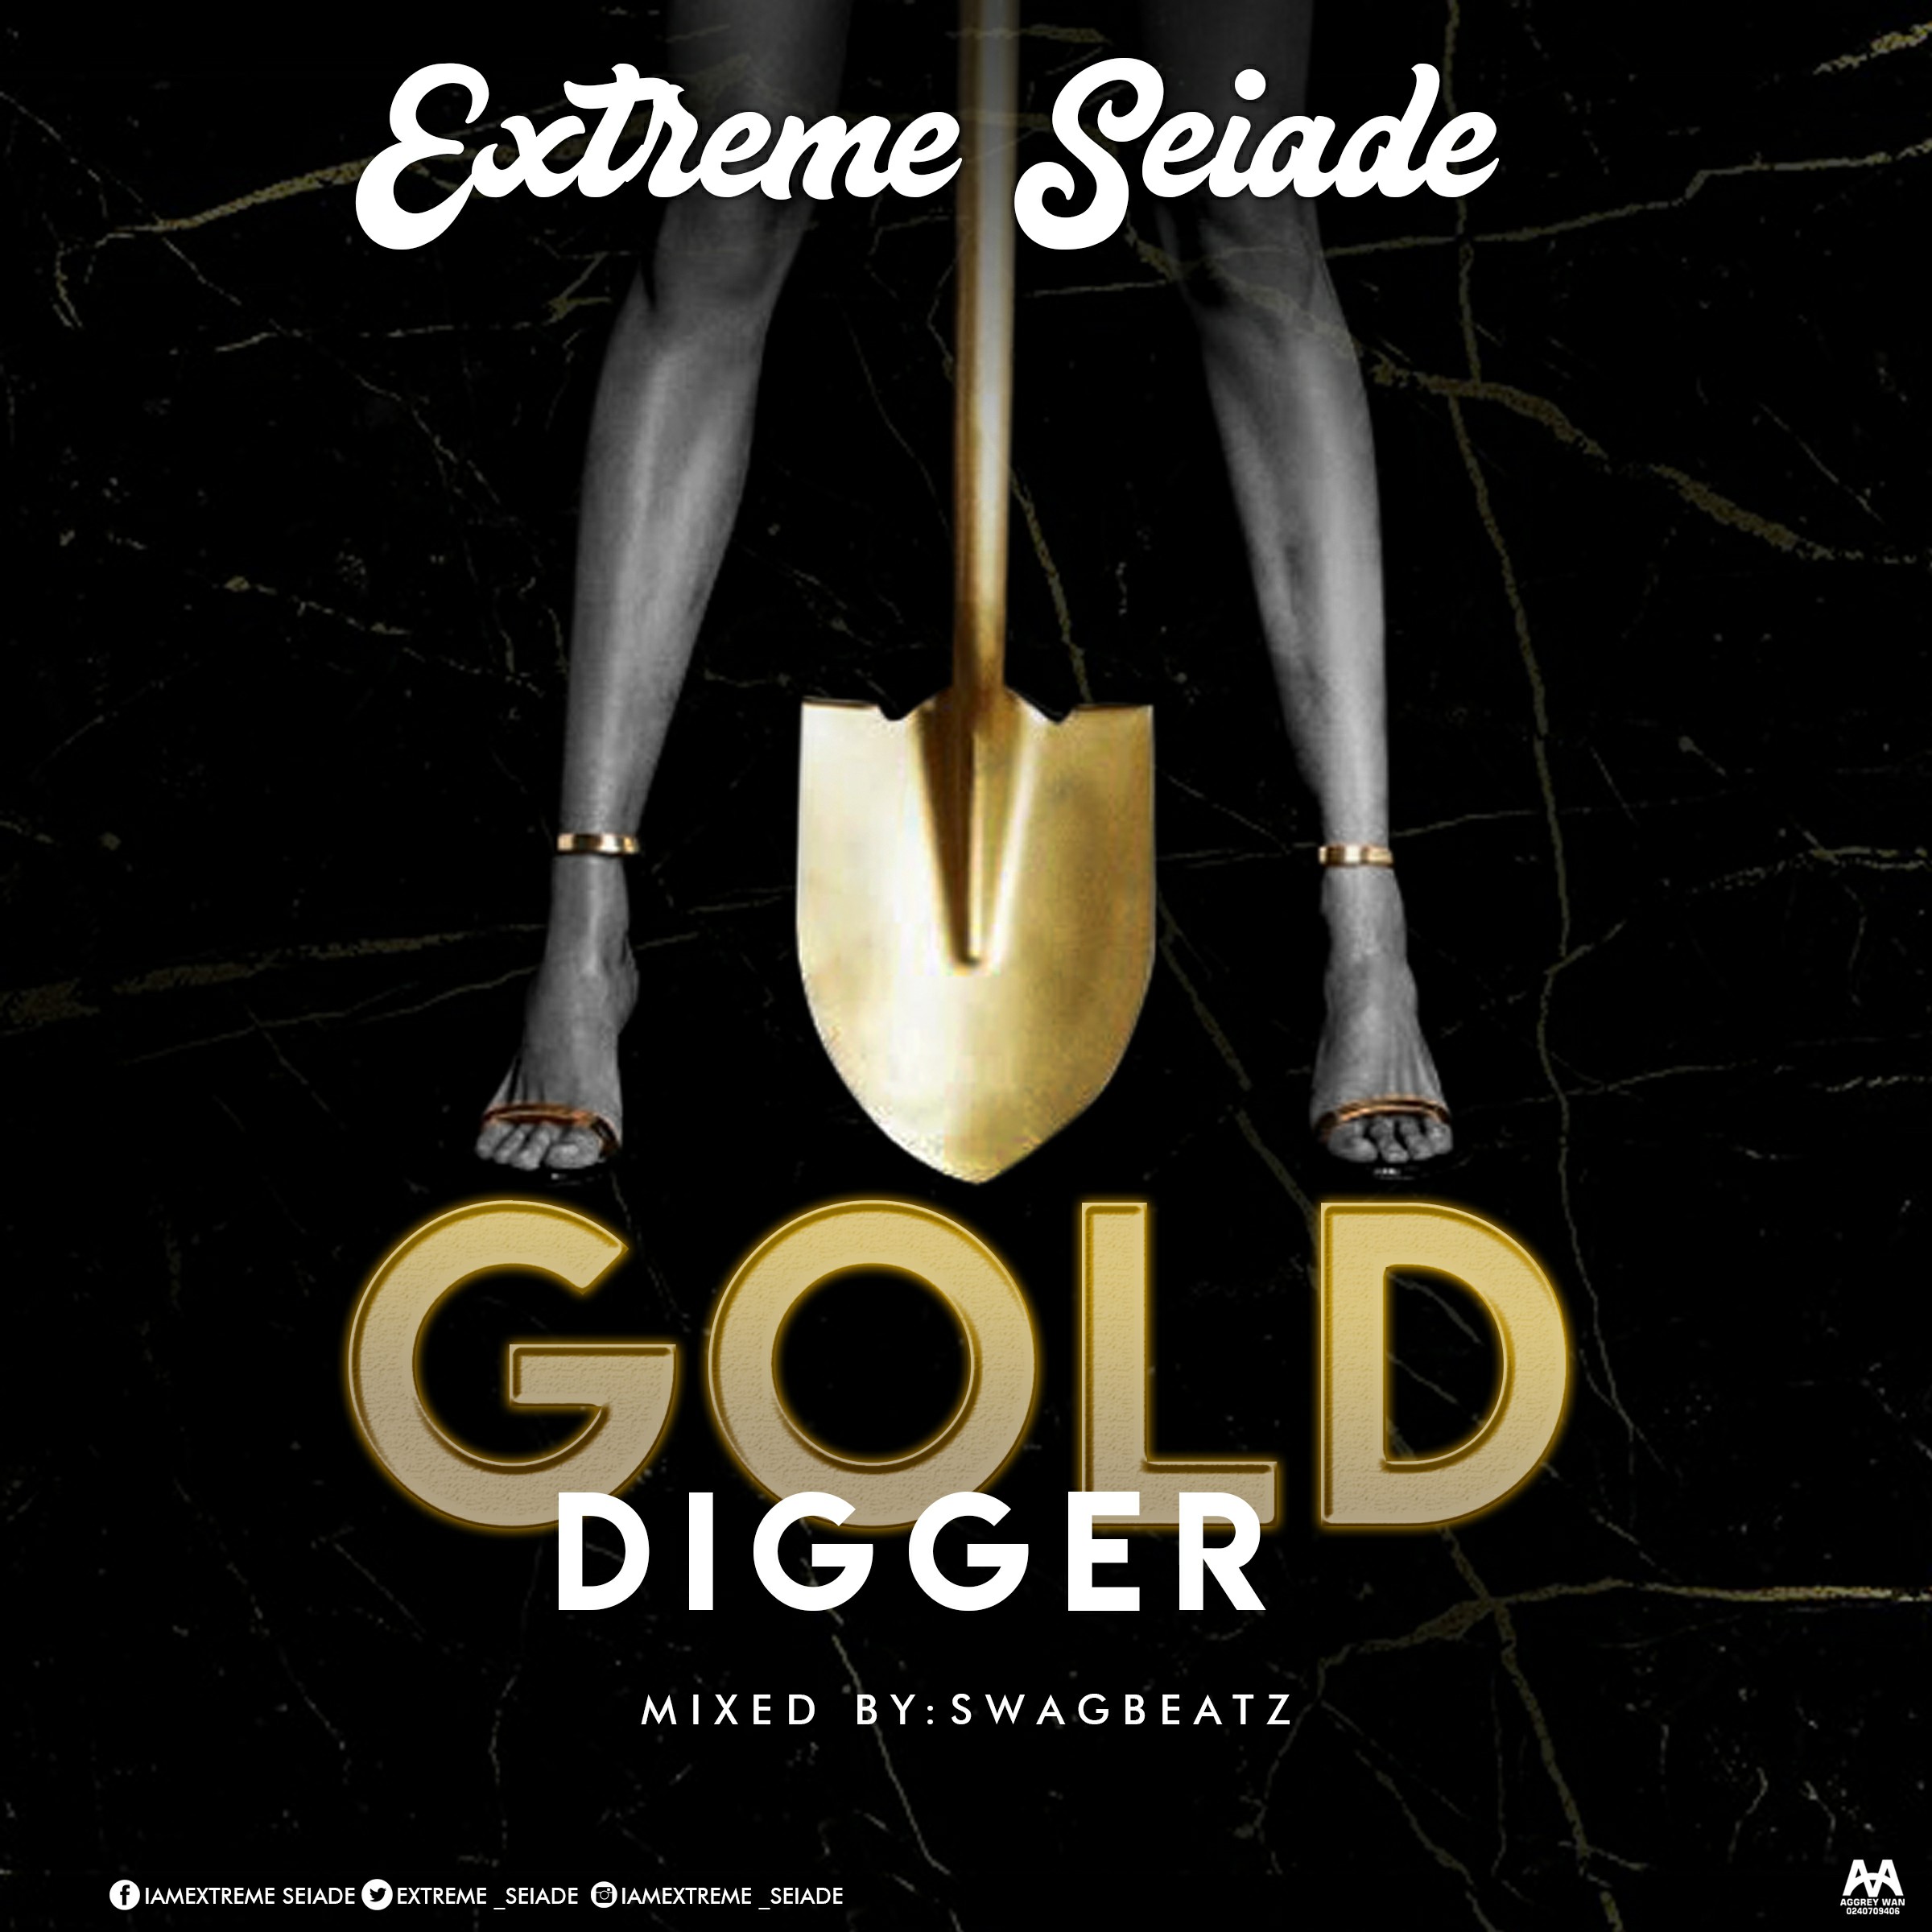 Extreme Seiade Gold Digger Mixed By Swagbeatz